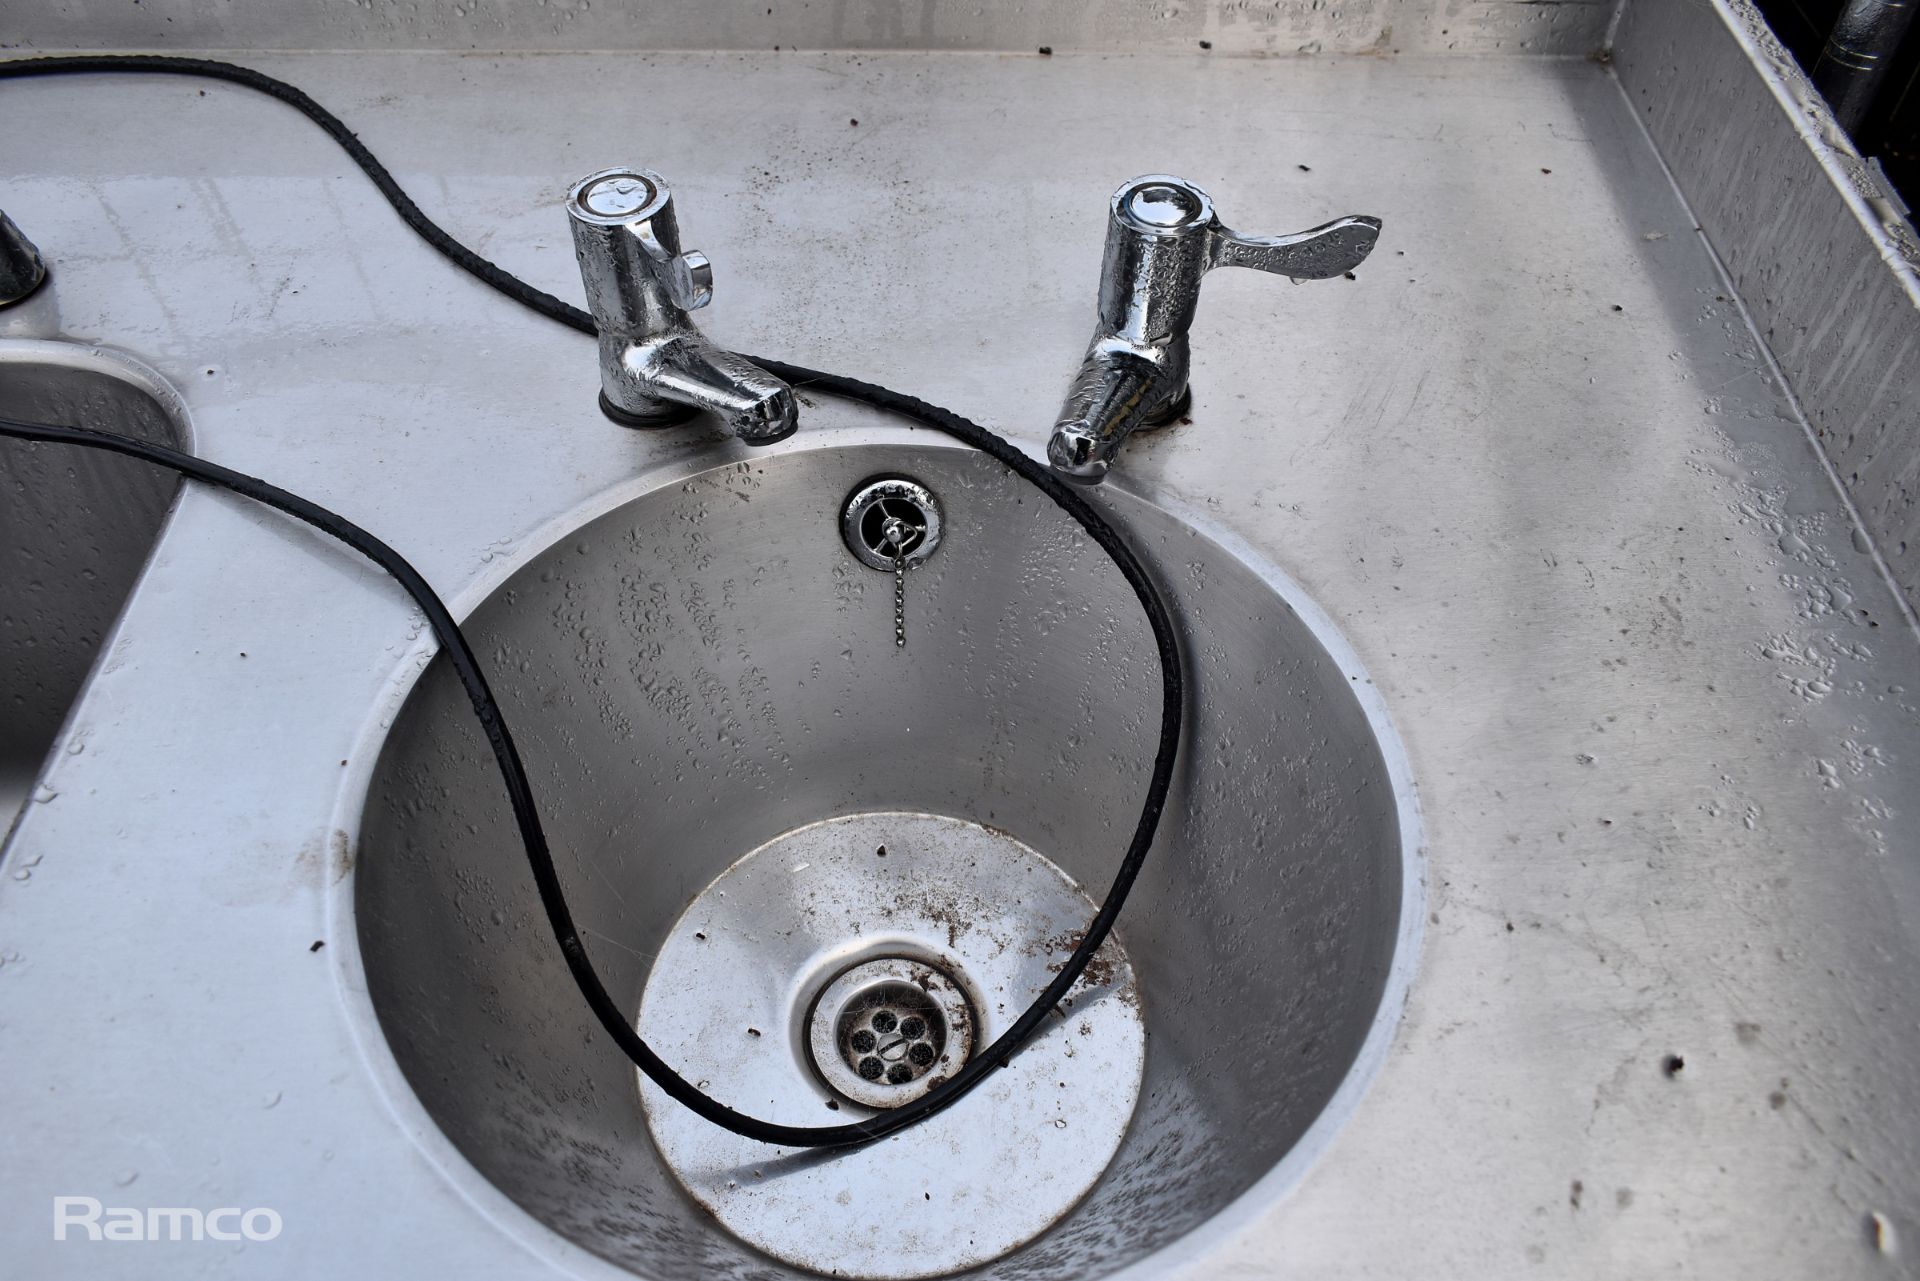 Stainless steel sink unit with wash basin - W 1700 x D 760 x H 1000mm - Image 3 of 3